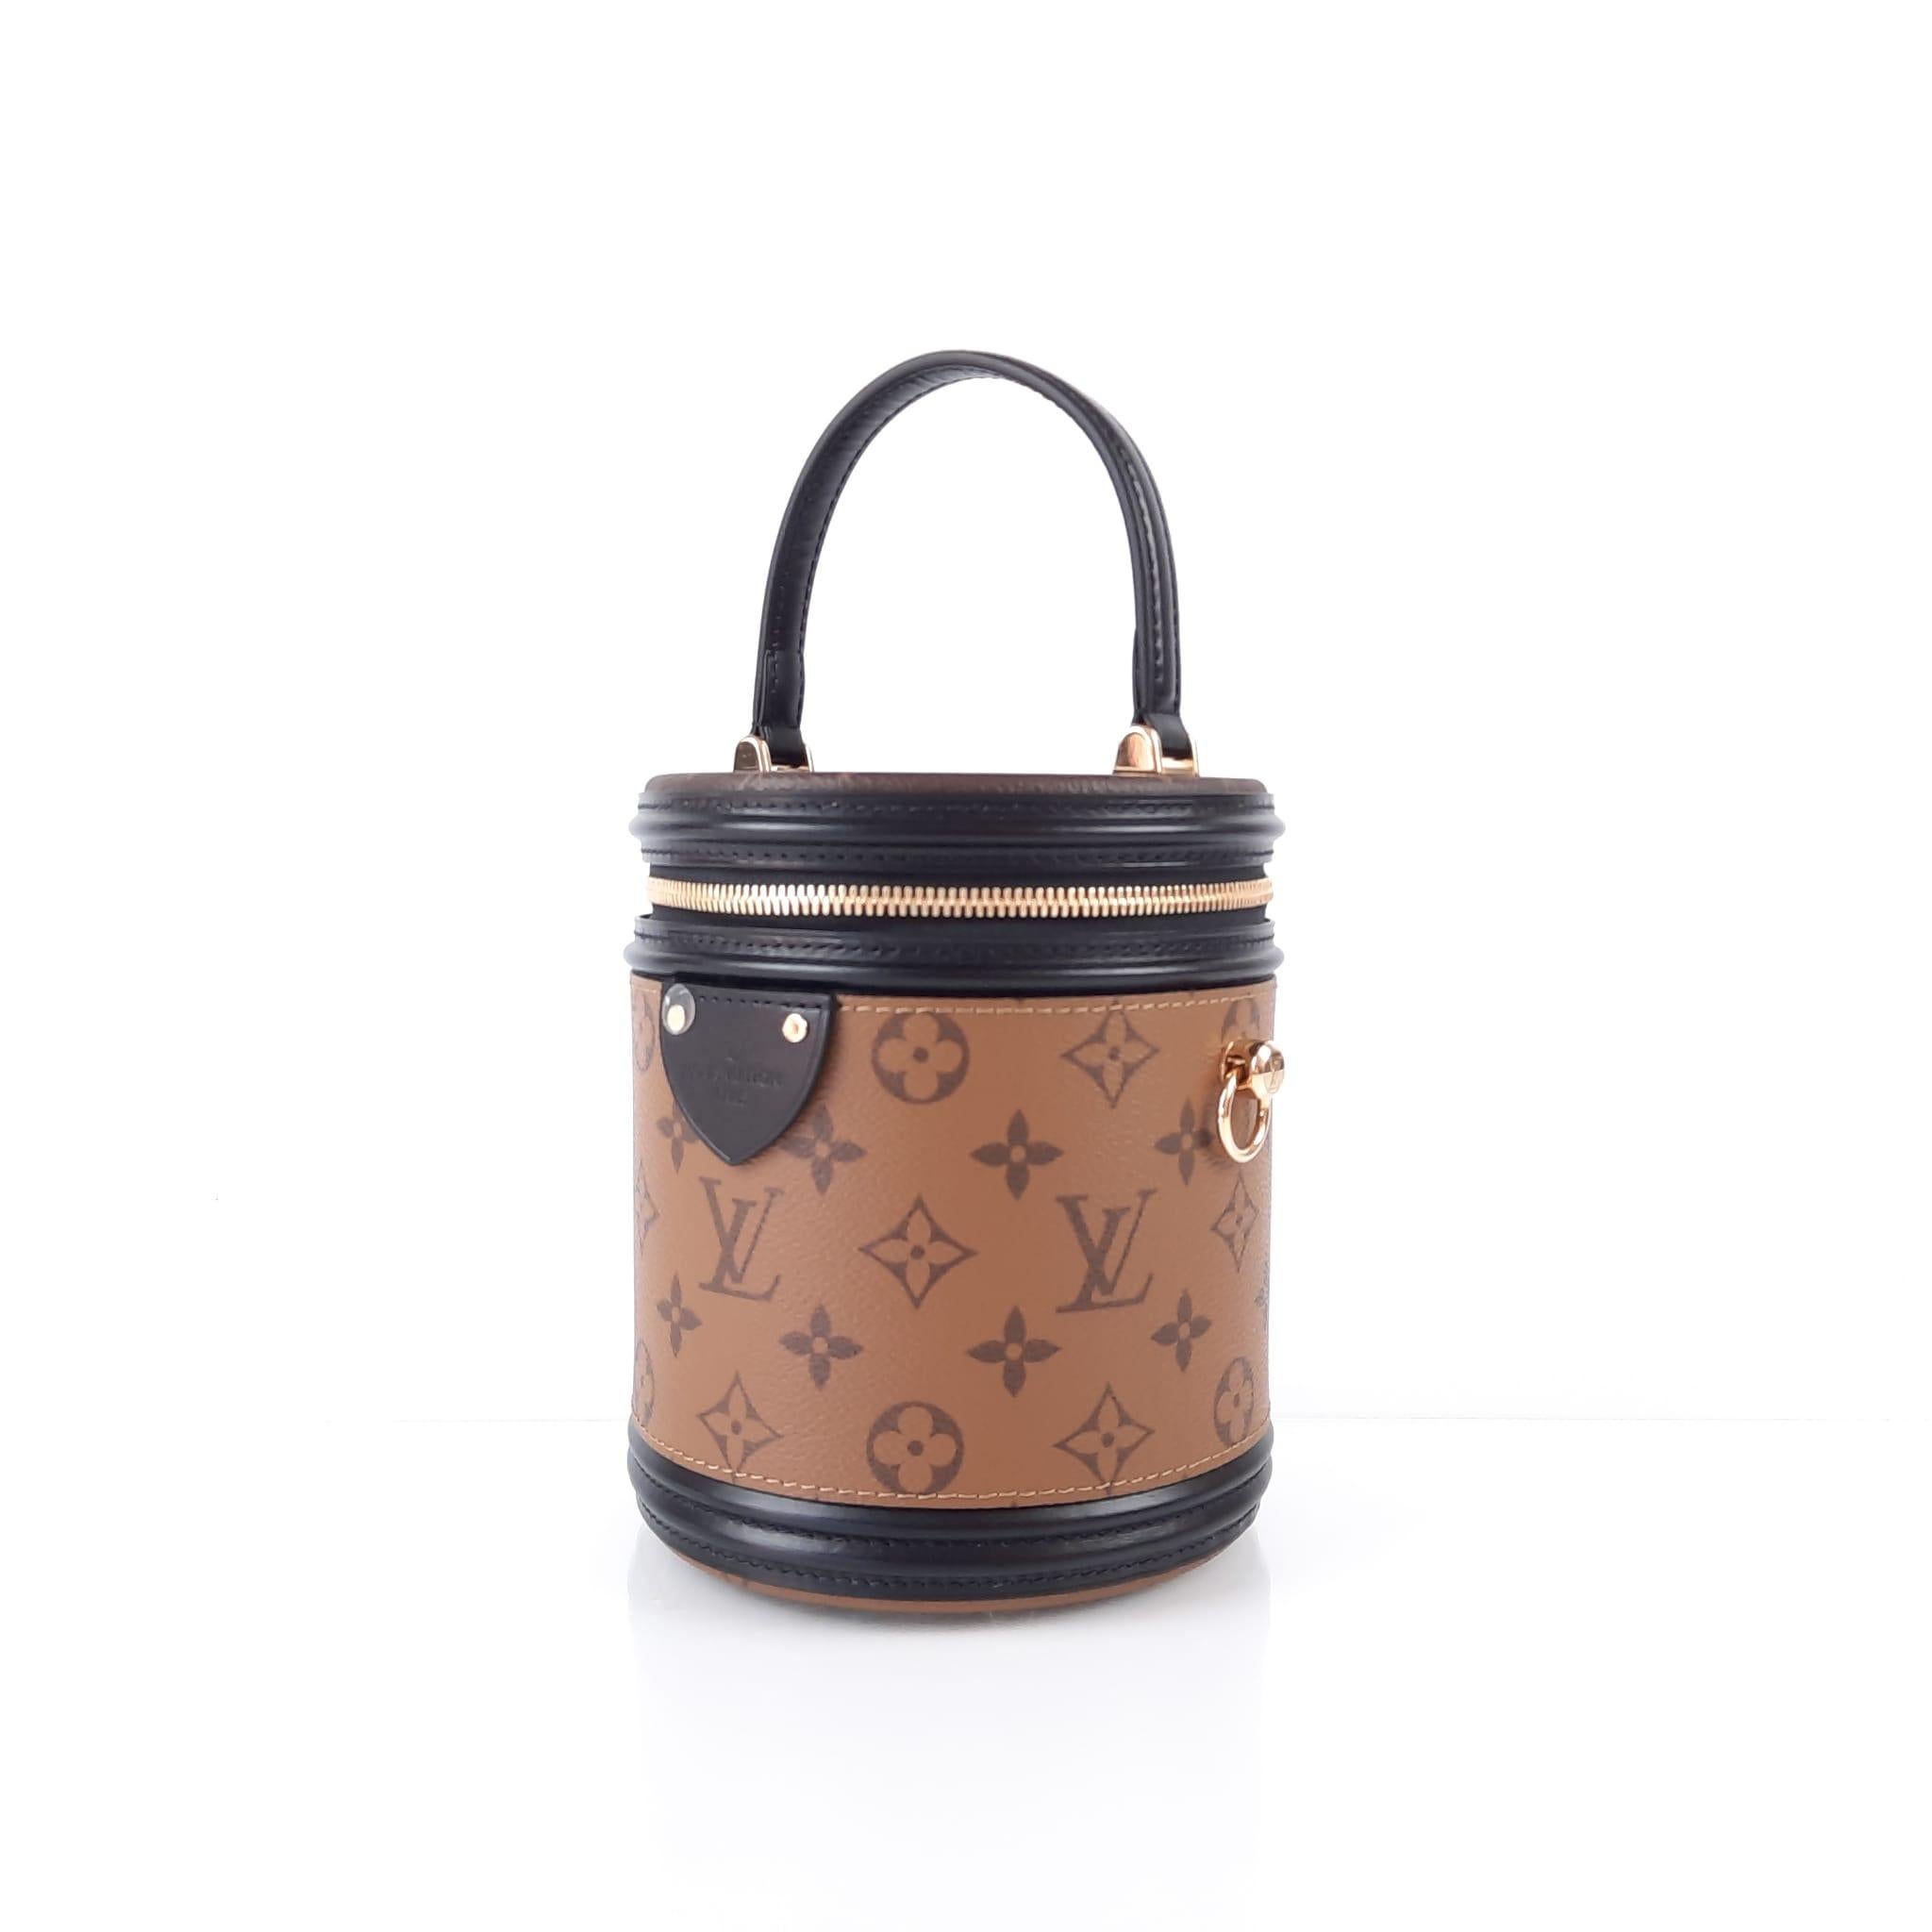 Featuring the historical shape of the LV Cannes beauty case, designer Nicolas Ghesquière revives a long-standing classic with the Cannes handbag. Petite in size and presented in a mix of Monogram and Monogram reverse coated canvas, the elegant piece